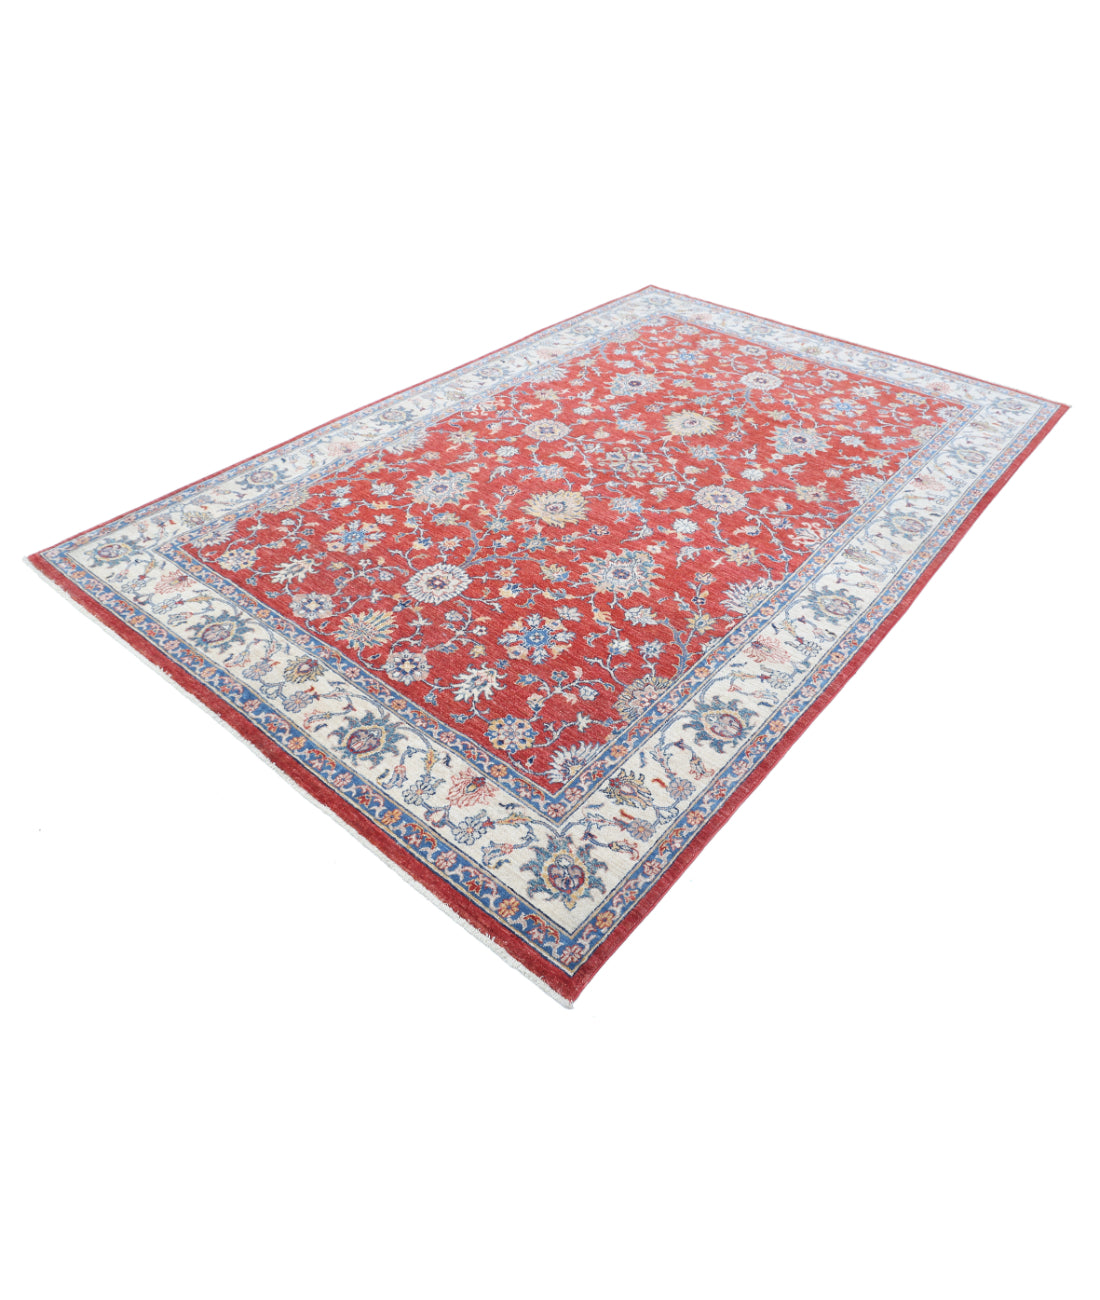 Hand Knotted Ziegler Farhan Wool Rug - 6'5'' x 9'9'' 6'5'' x 9'9'' (193 X 293) / Red / Ivory